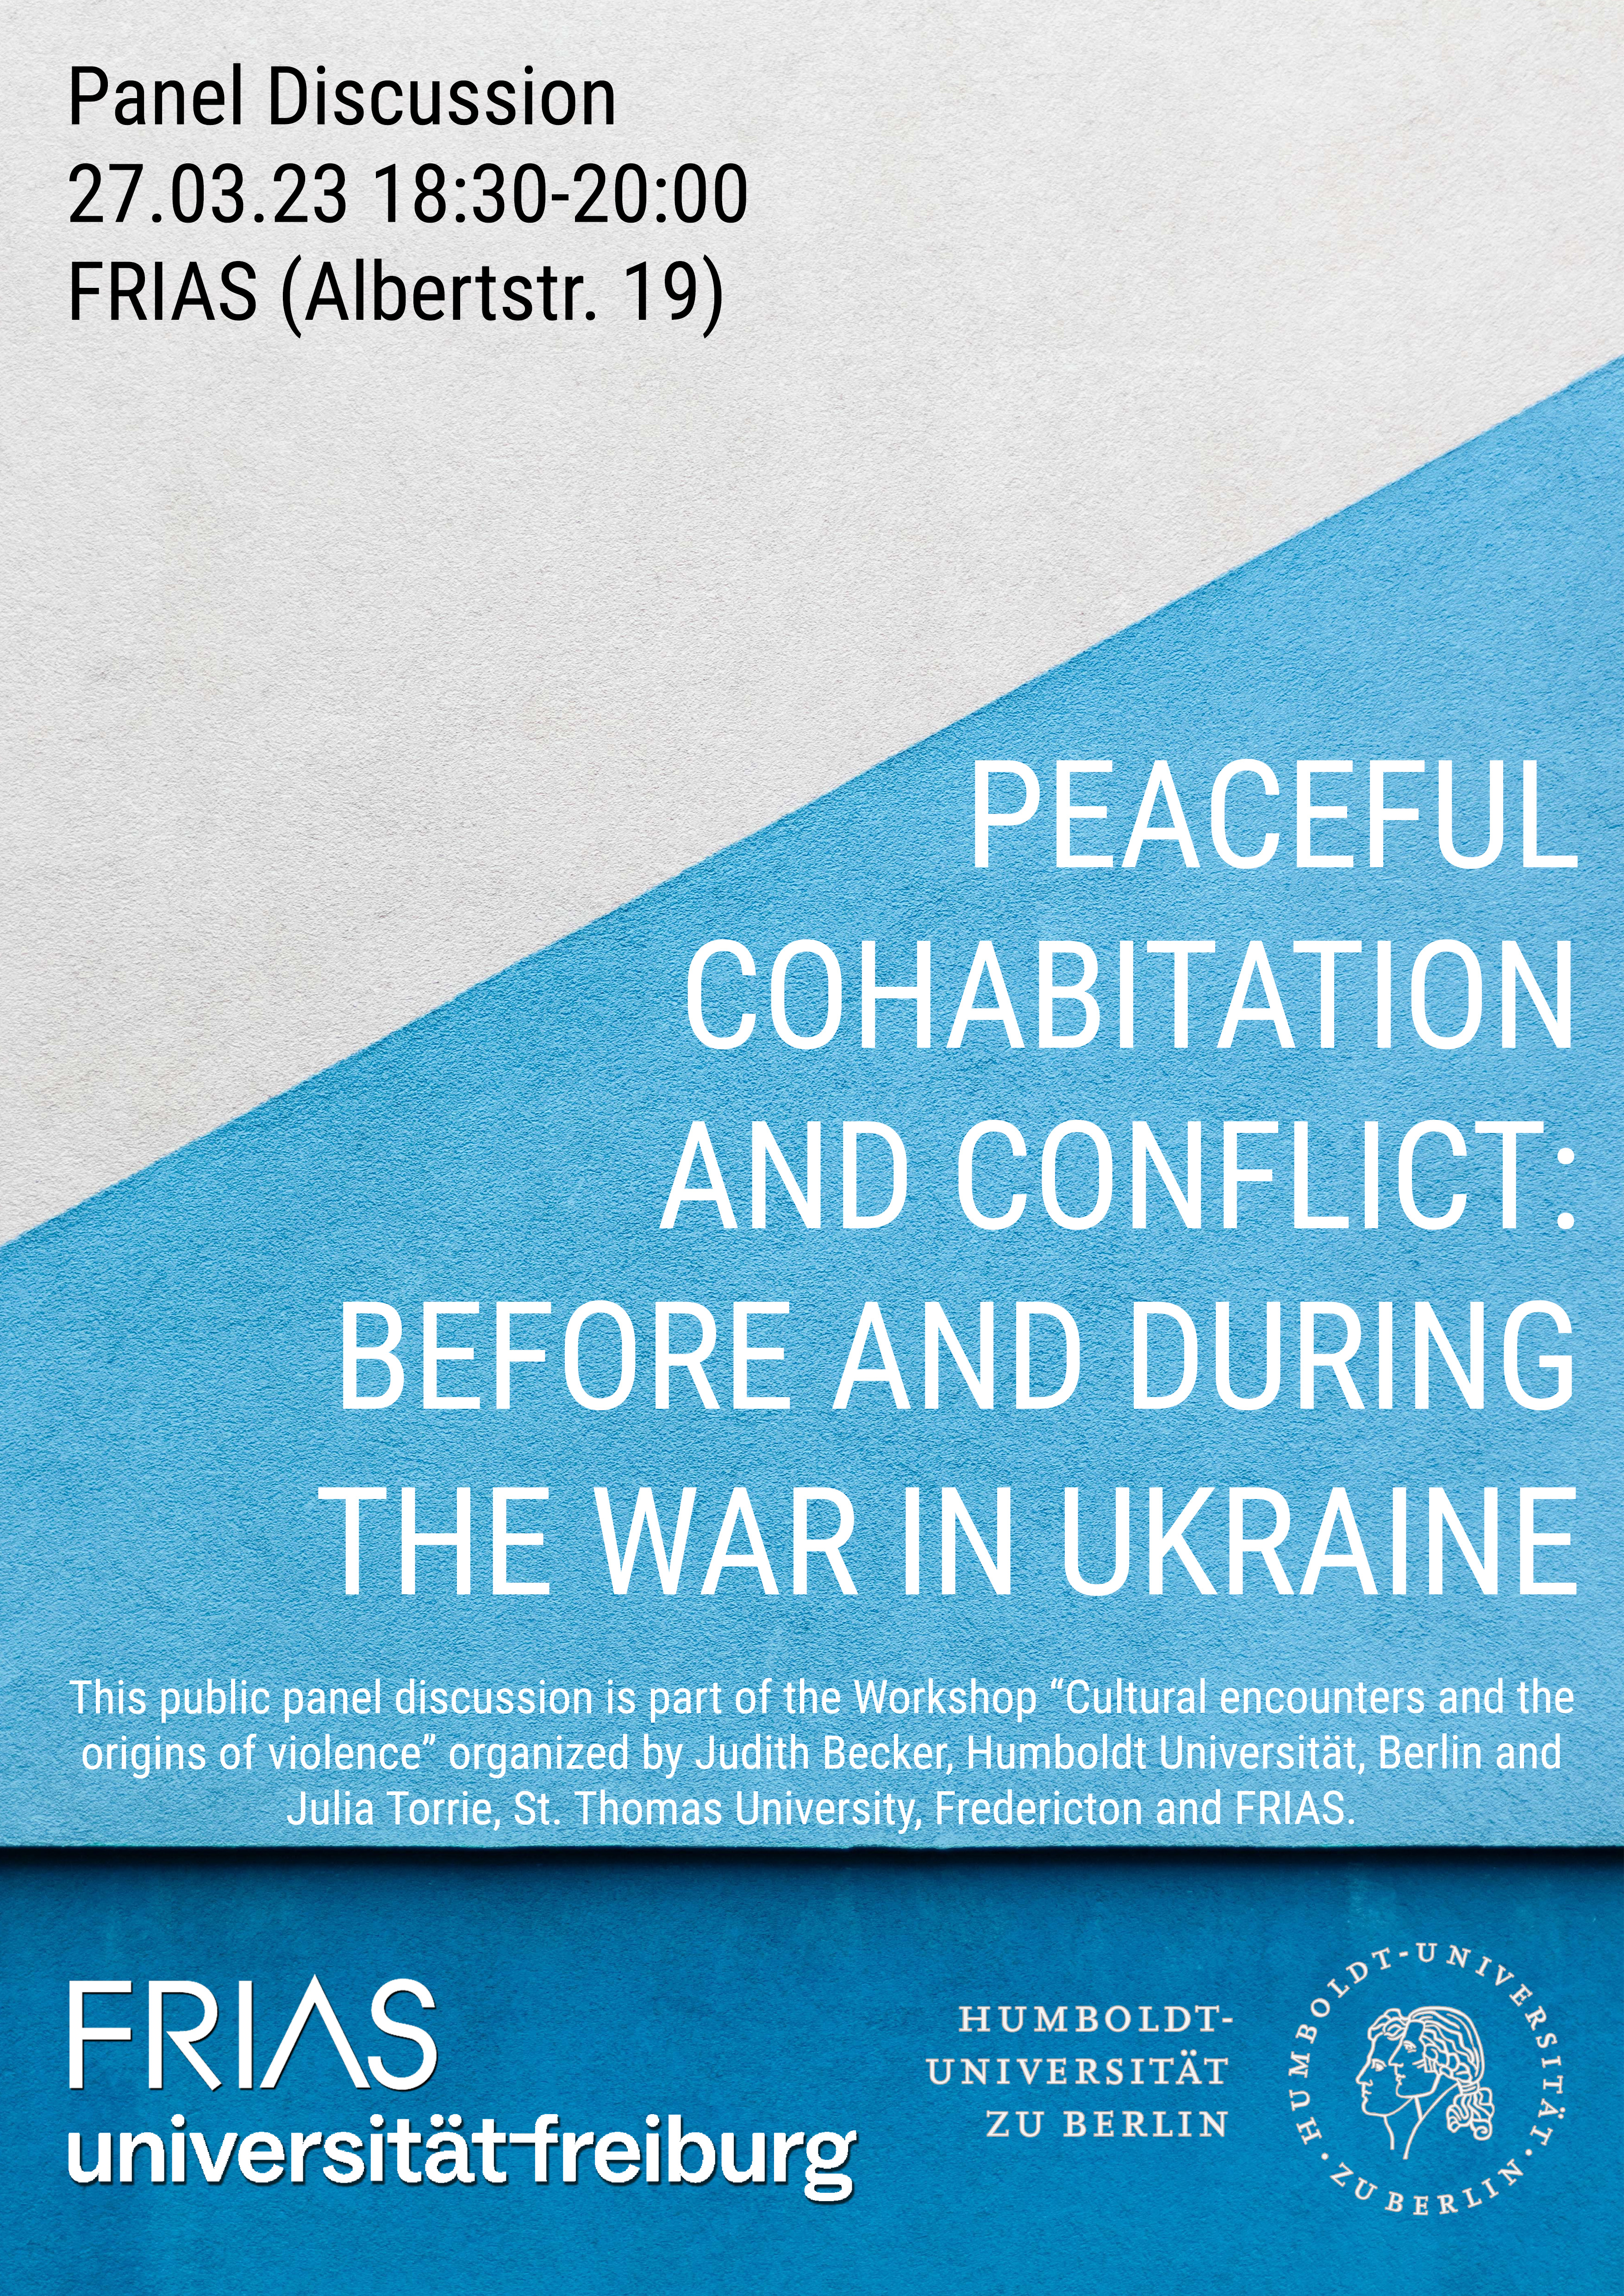 PEACEFUL COHABITATION AND CONFLICT